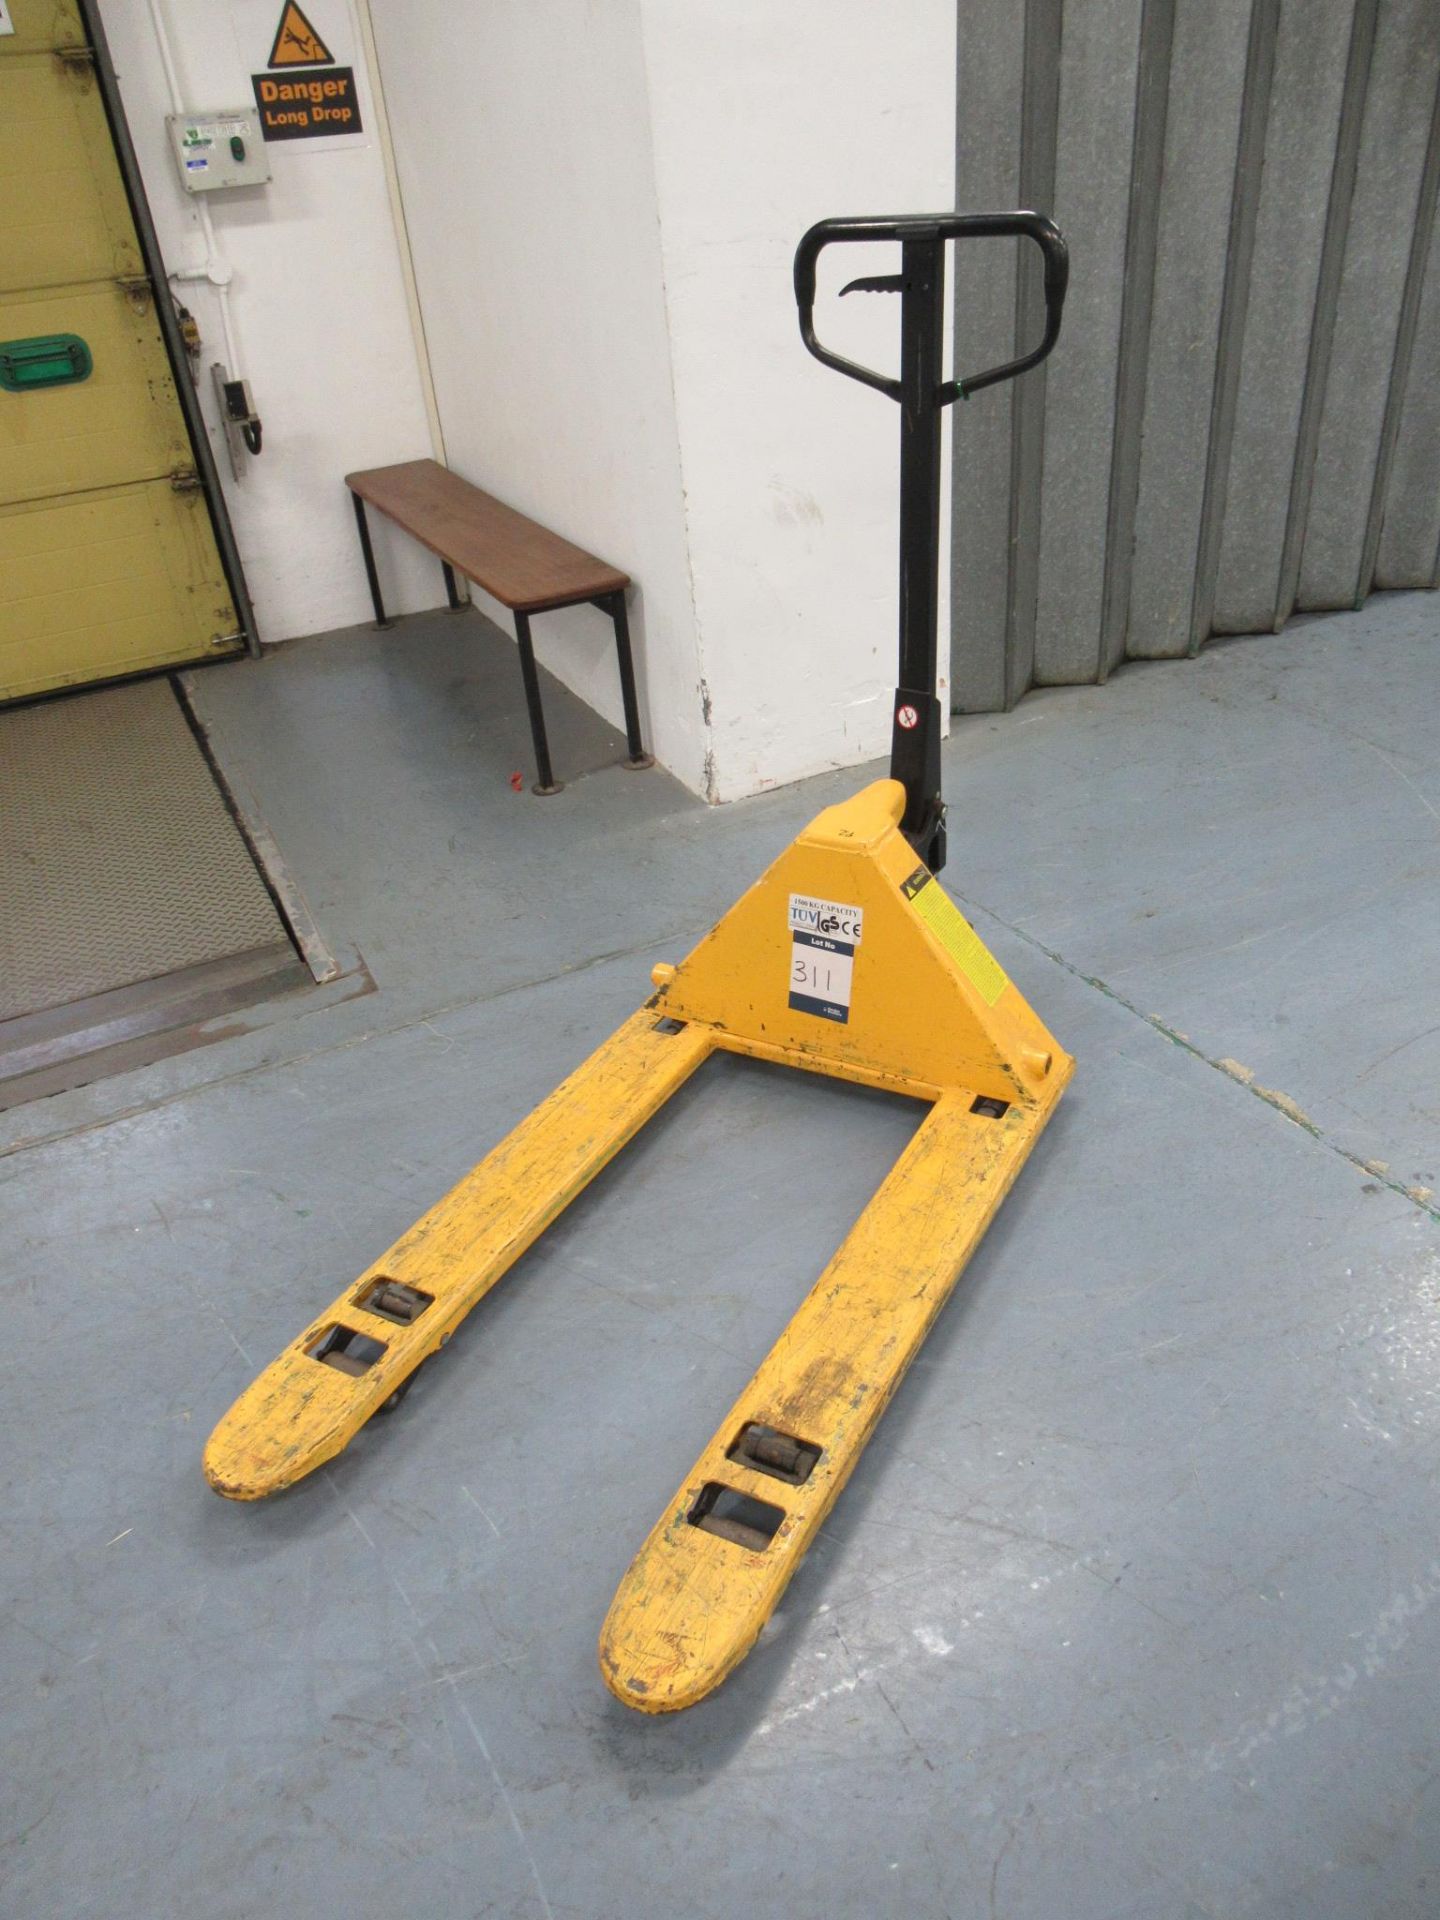 1500kg capacity hydraulic wide fork hand pallet truck, fork length 1000mm x width 675mm